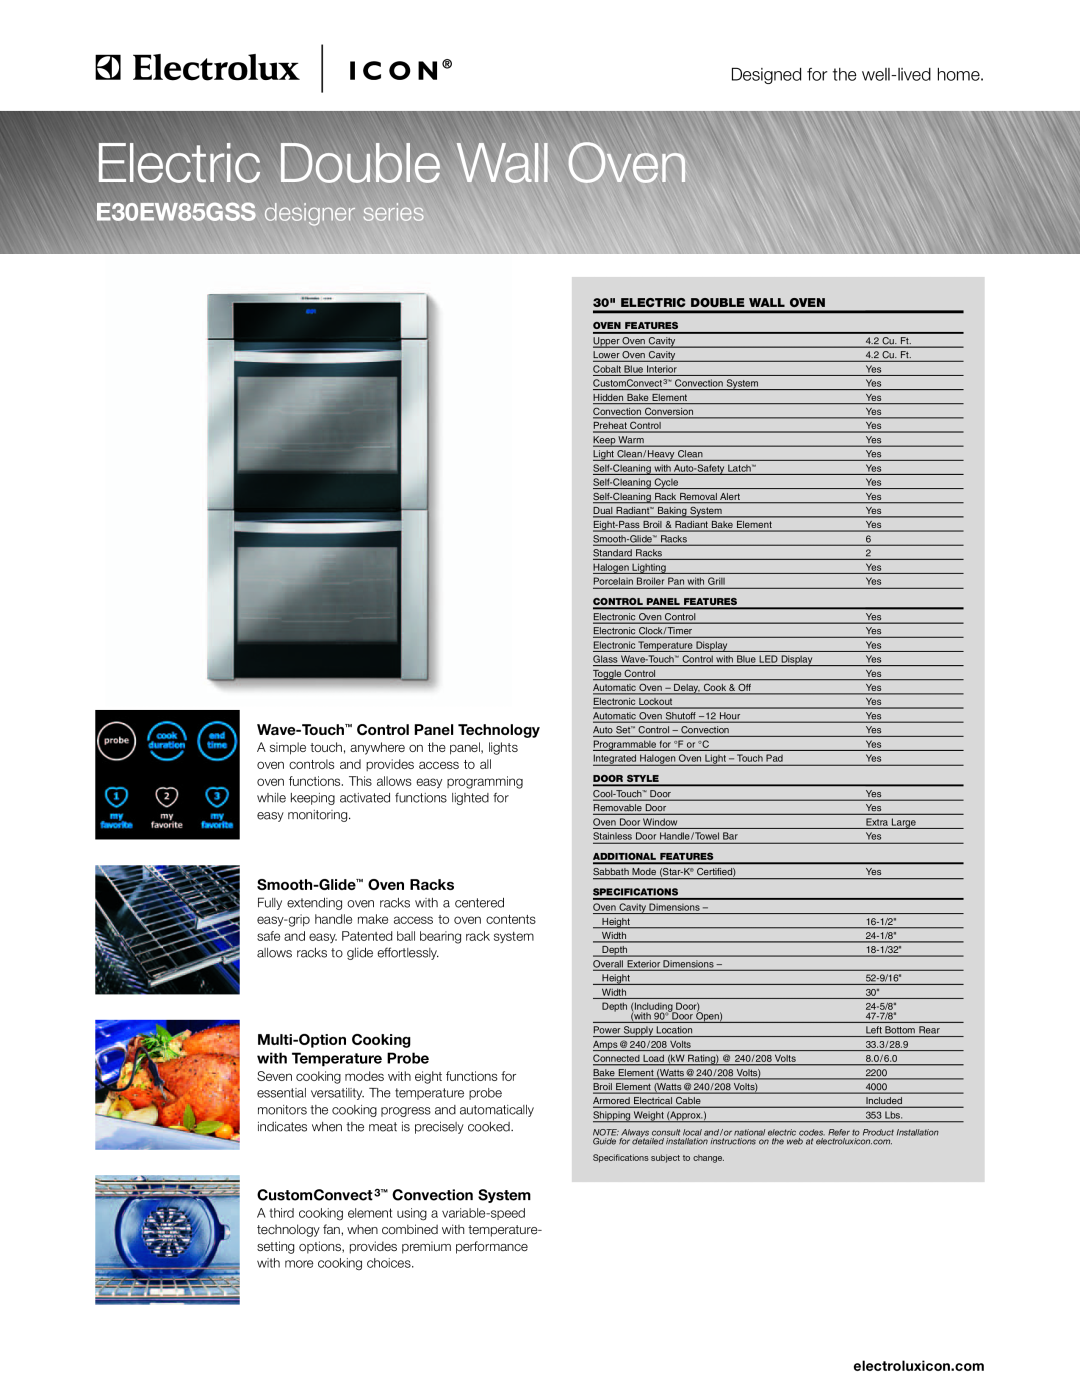 Electrolux E30EW85GSS specifications Wave-Touch Control Panel Technology, Smooth-Glide Oven Racks, electroluxicon.com 